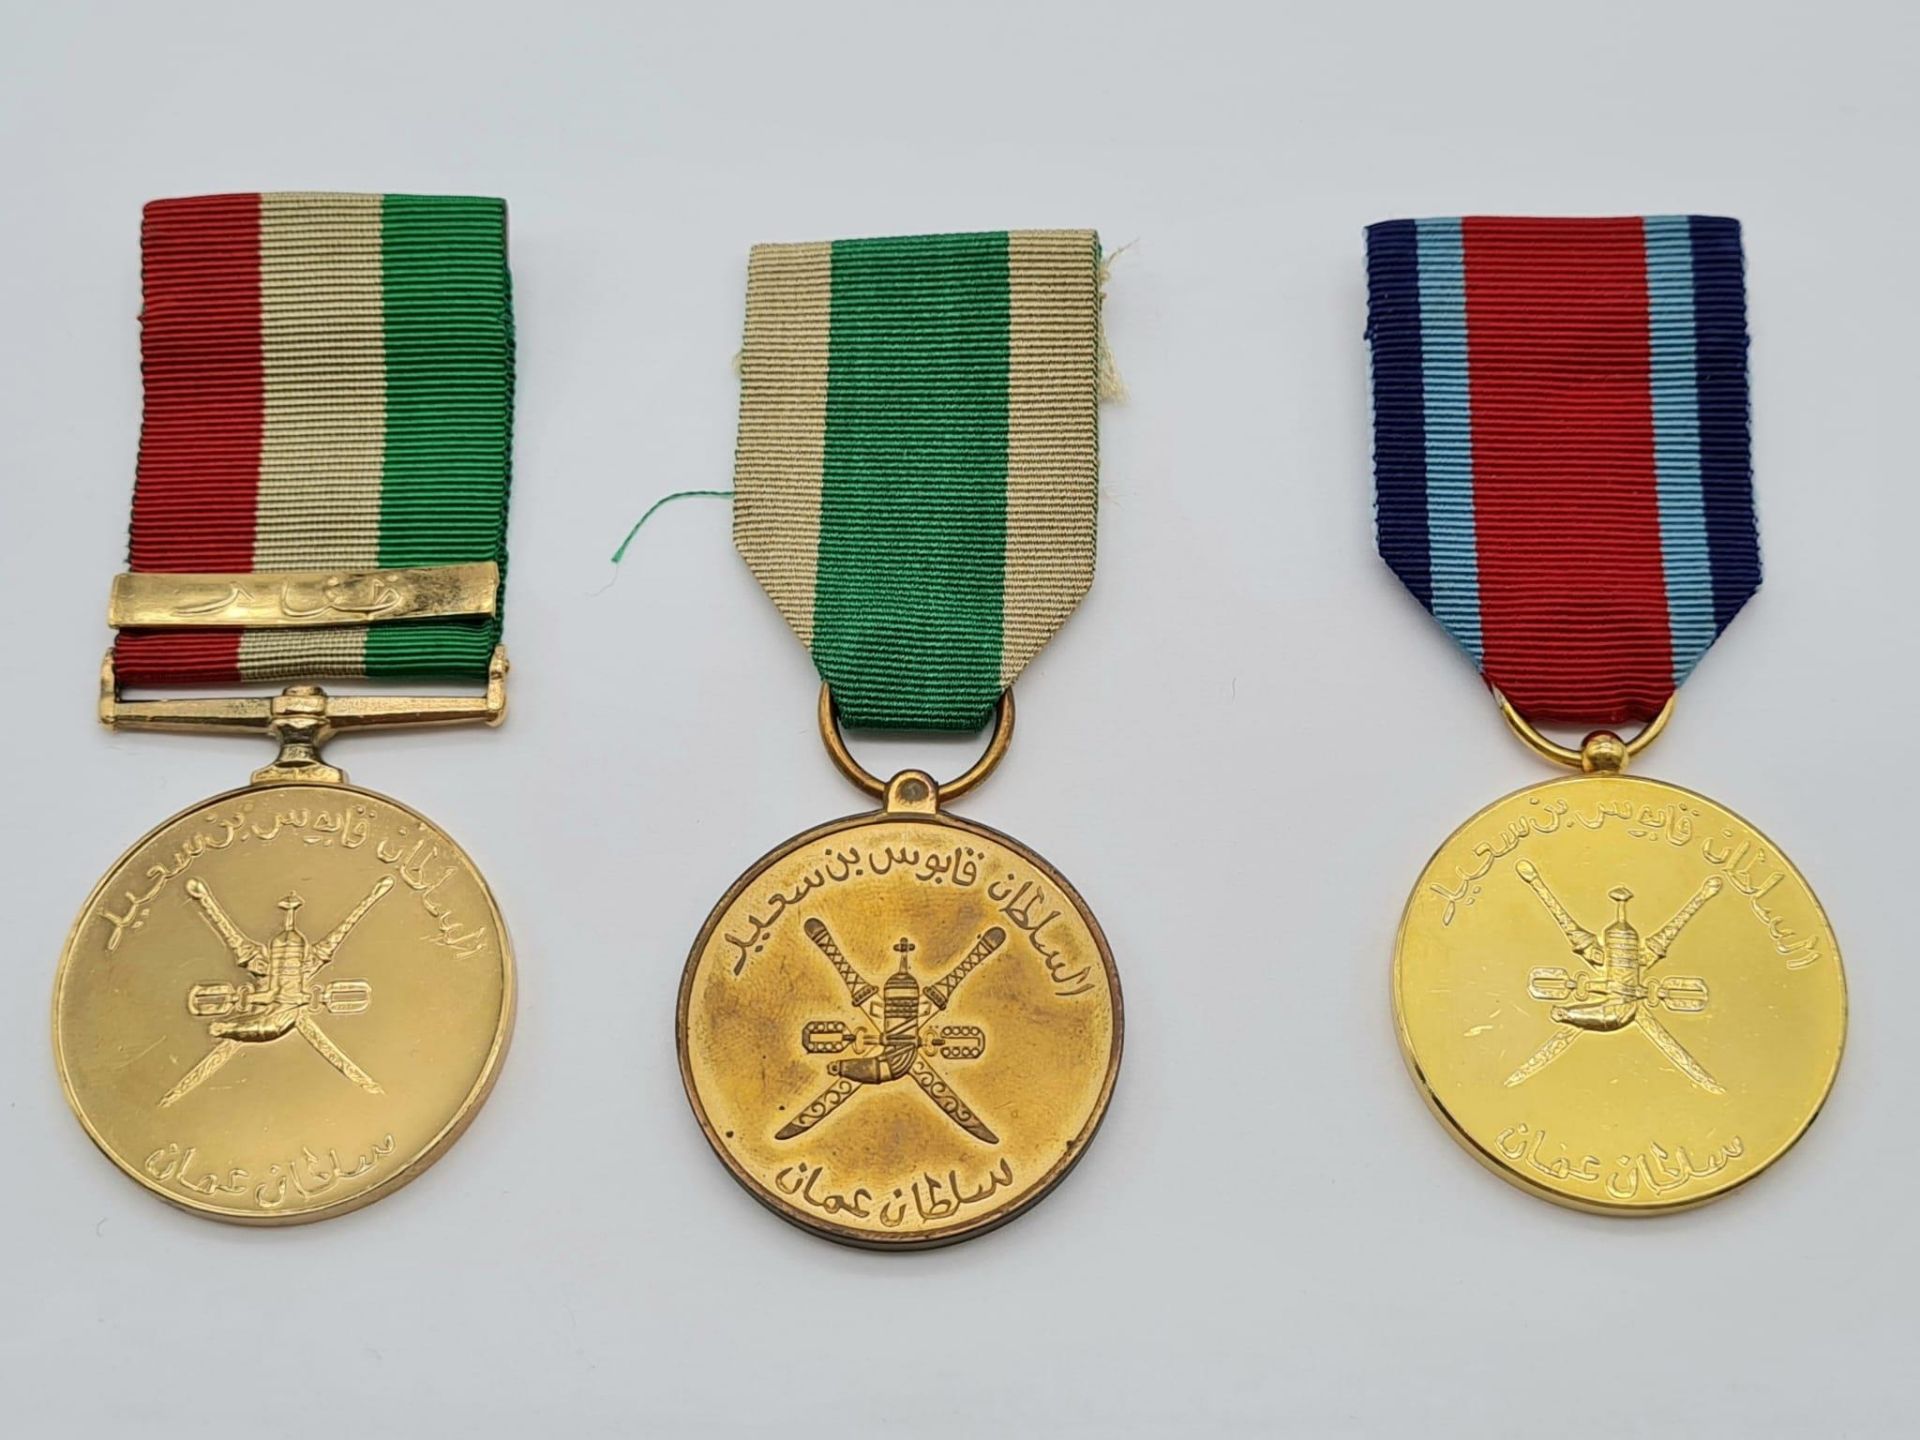 Group of three campaign medals awarded by Sultan Qaboos of Oman to British service personnel who